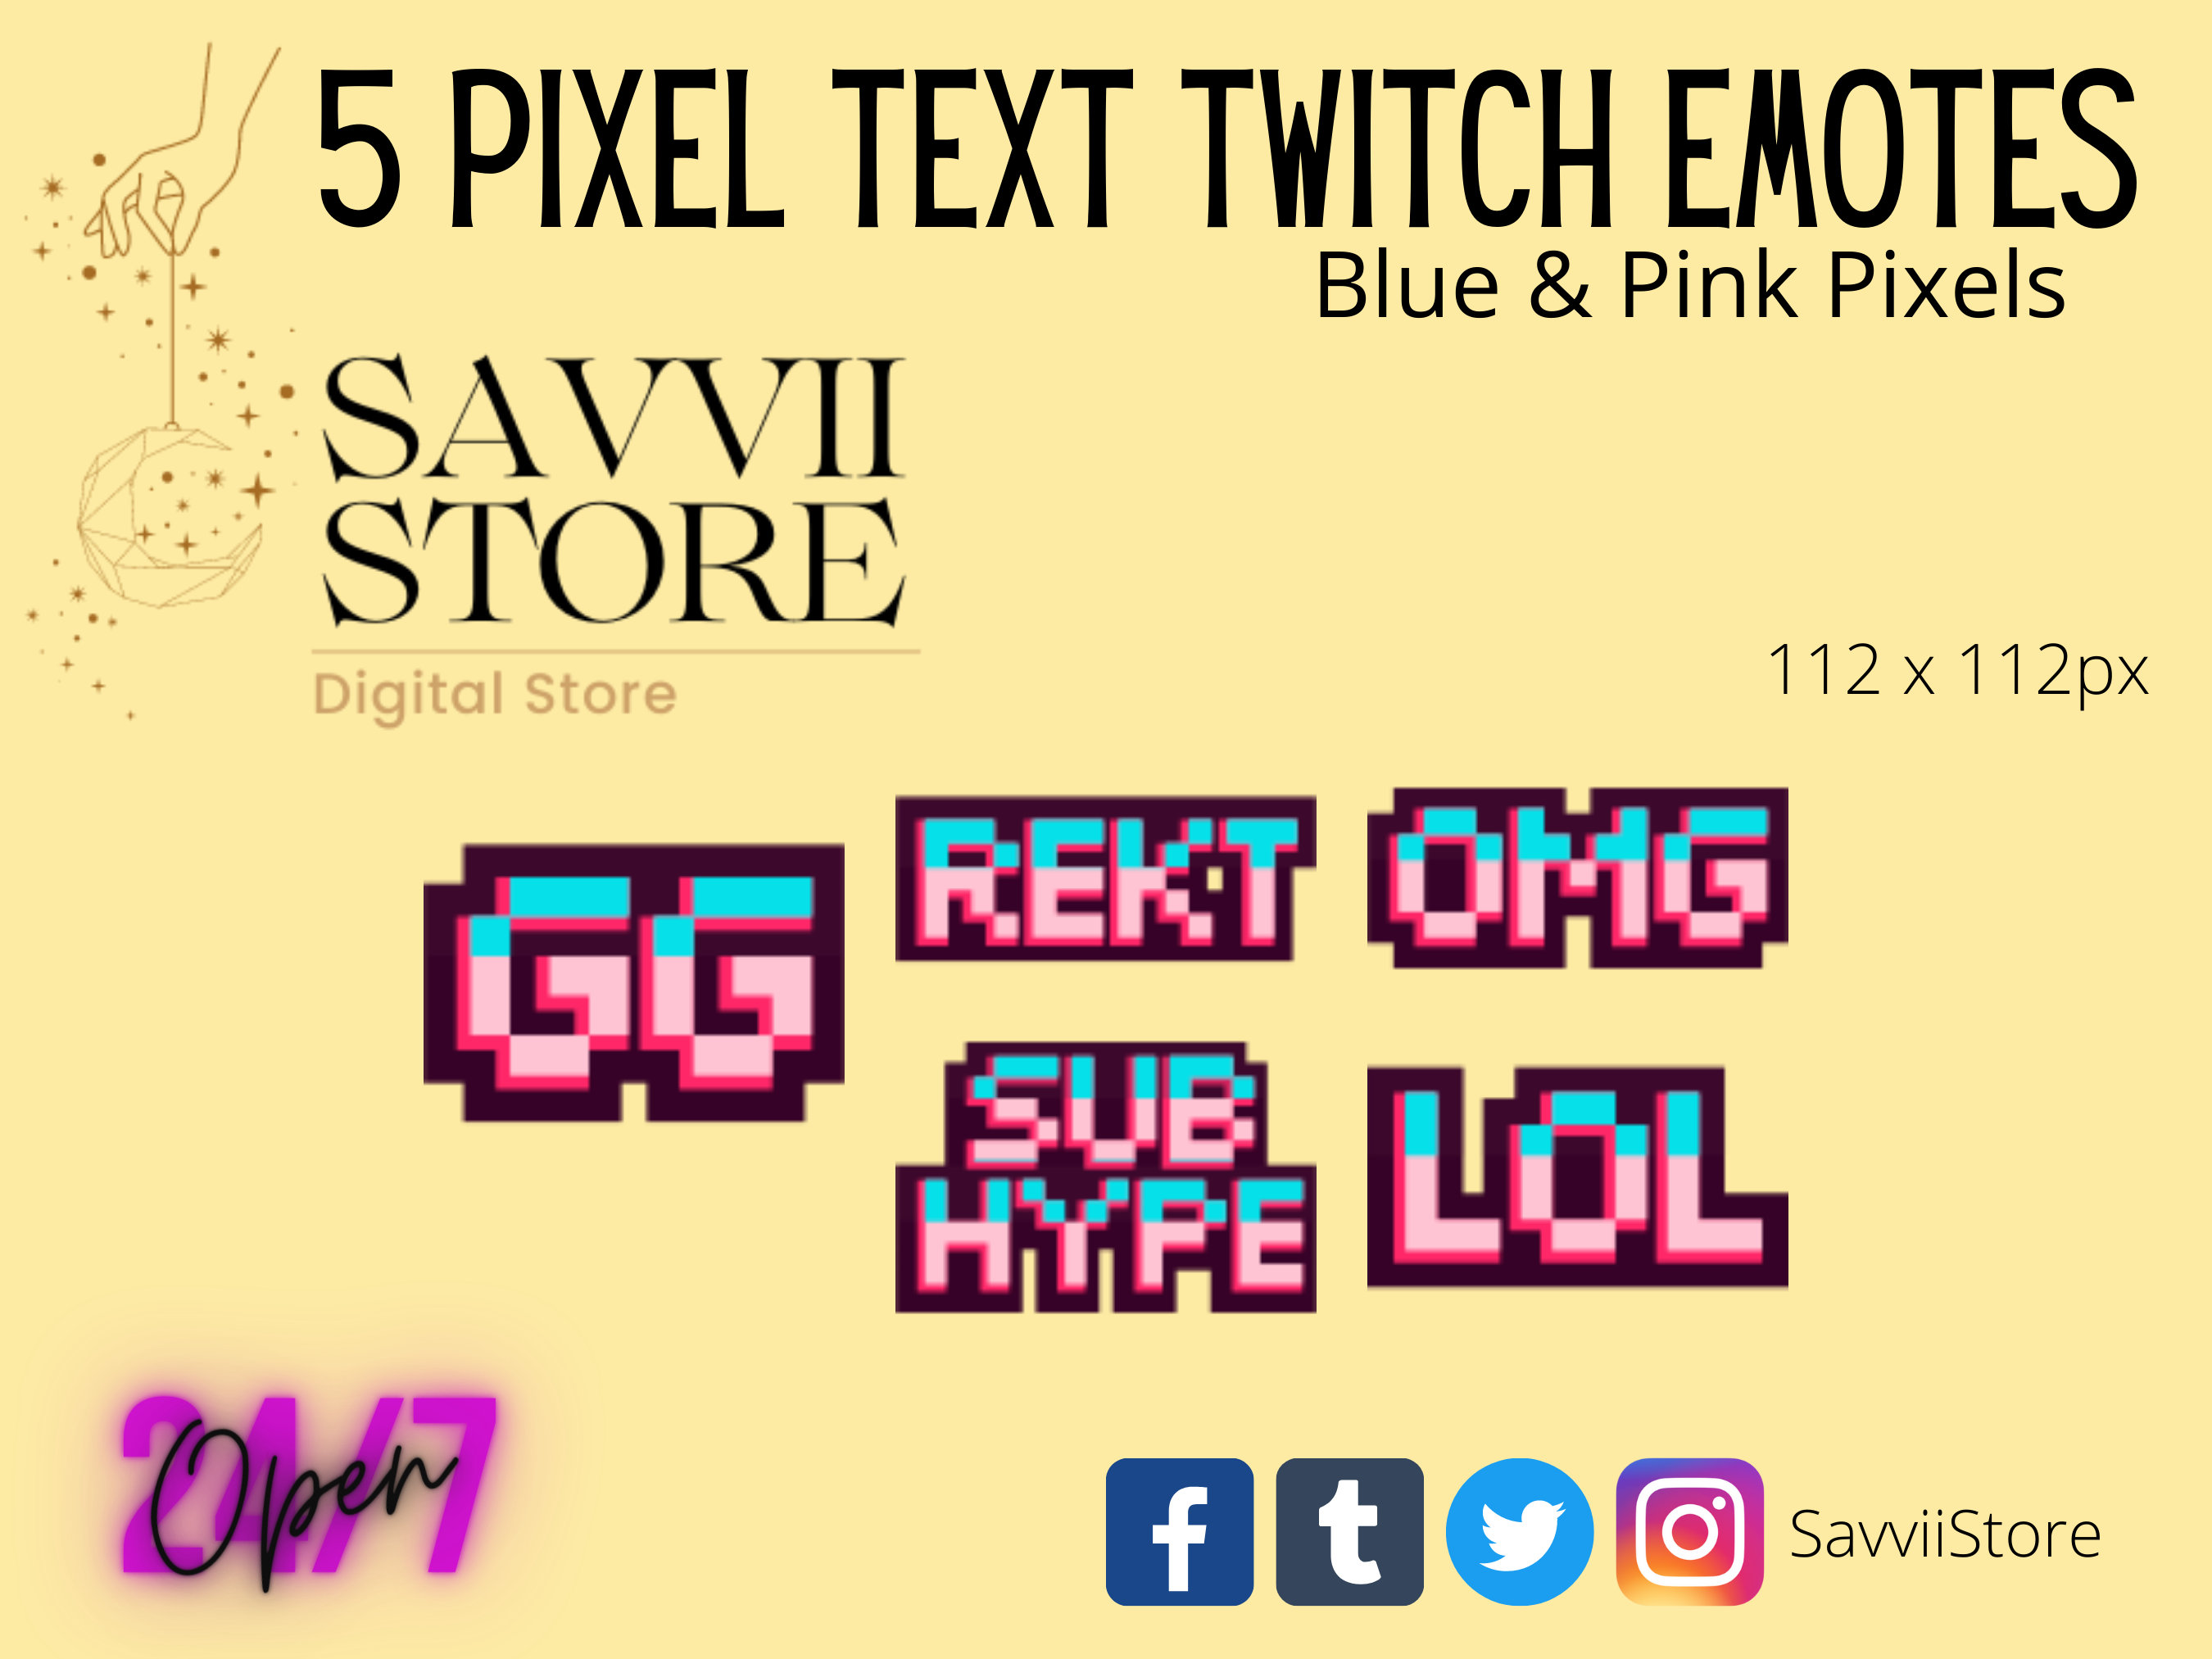 OMG! NEW EMOTES! Get All 3 For FREE! 